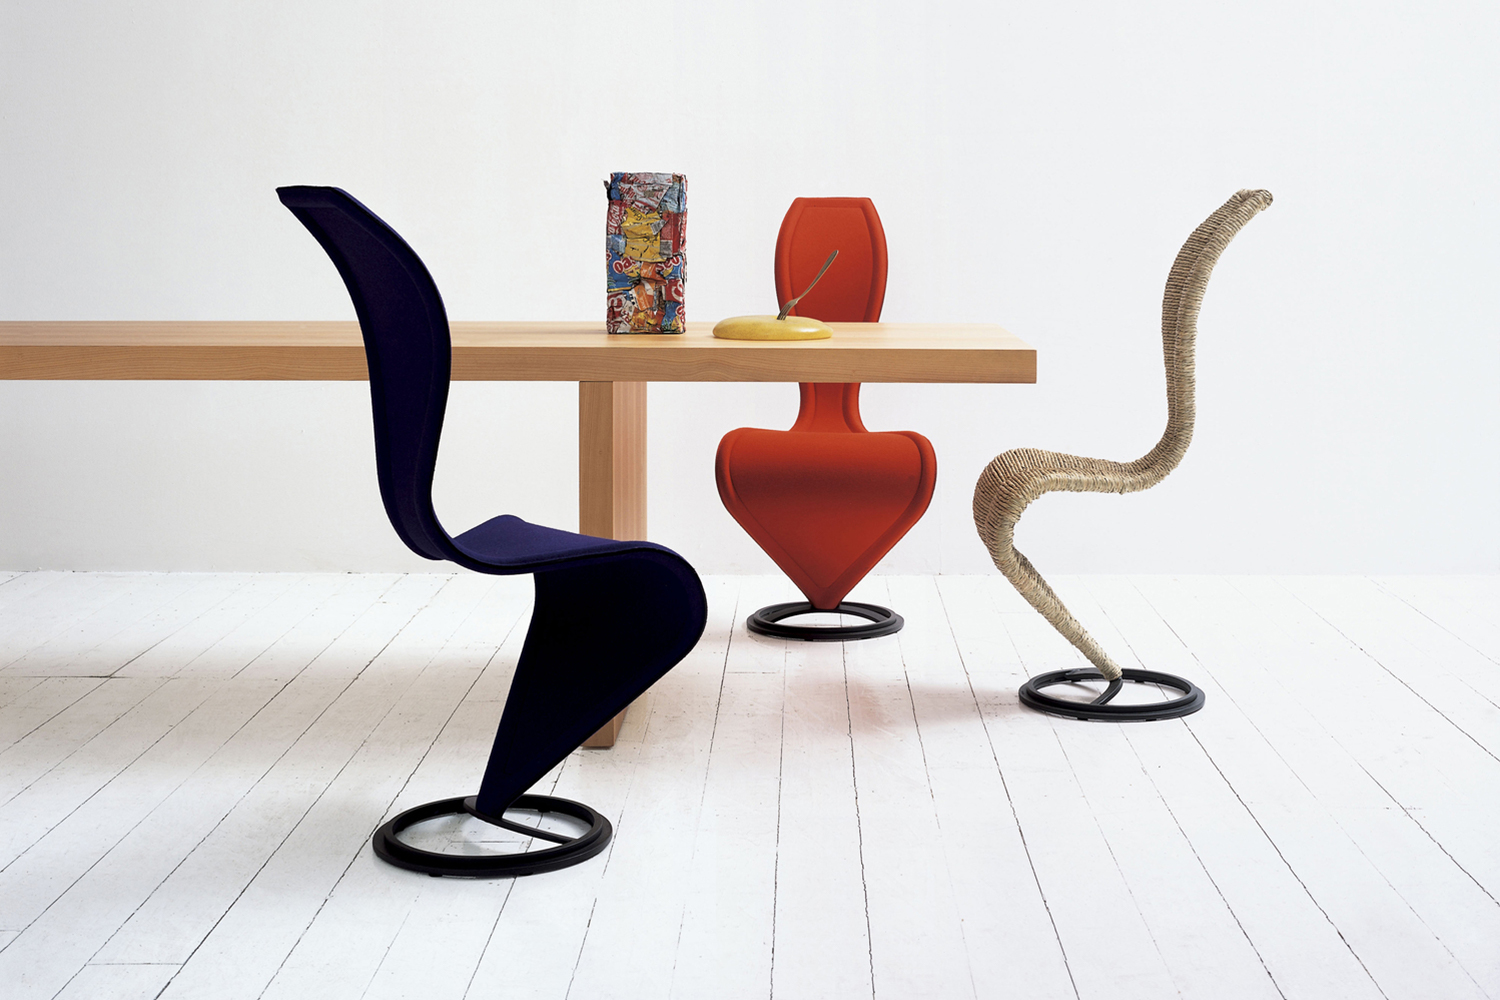 Three versions of the Tom Dixon S-Chair sitting around a table